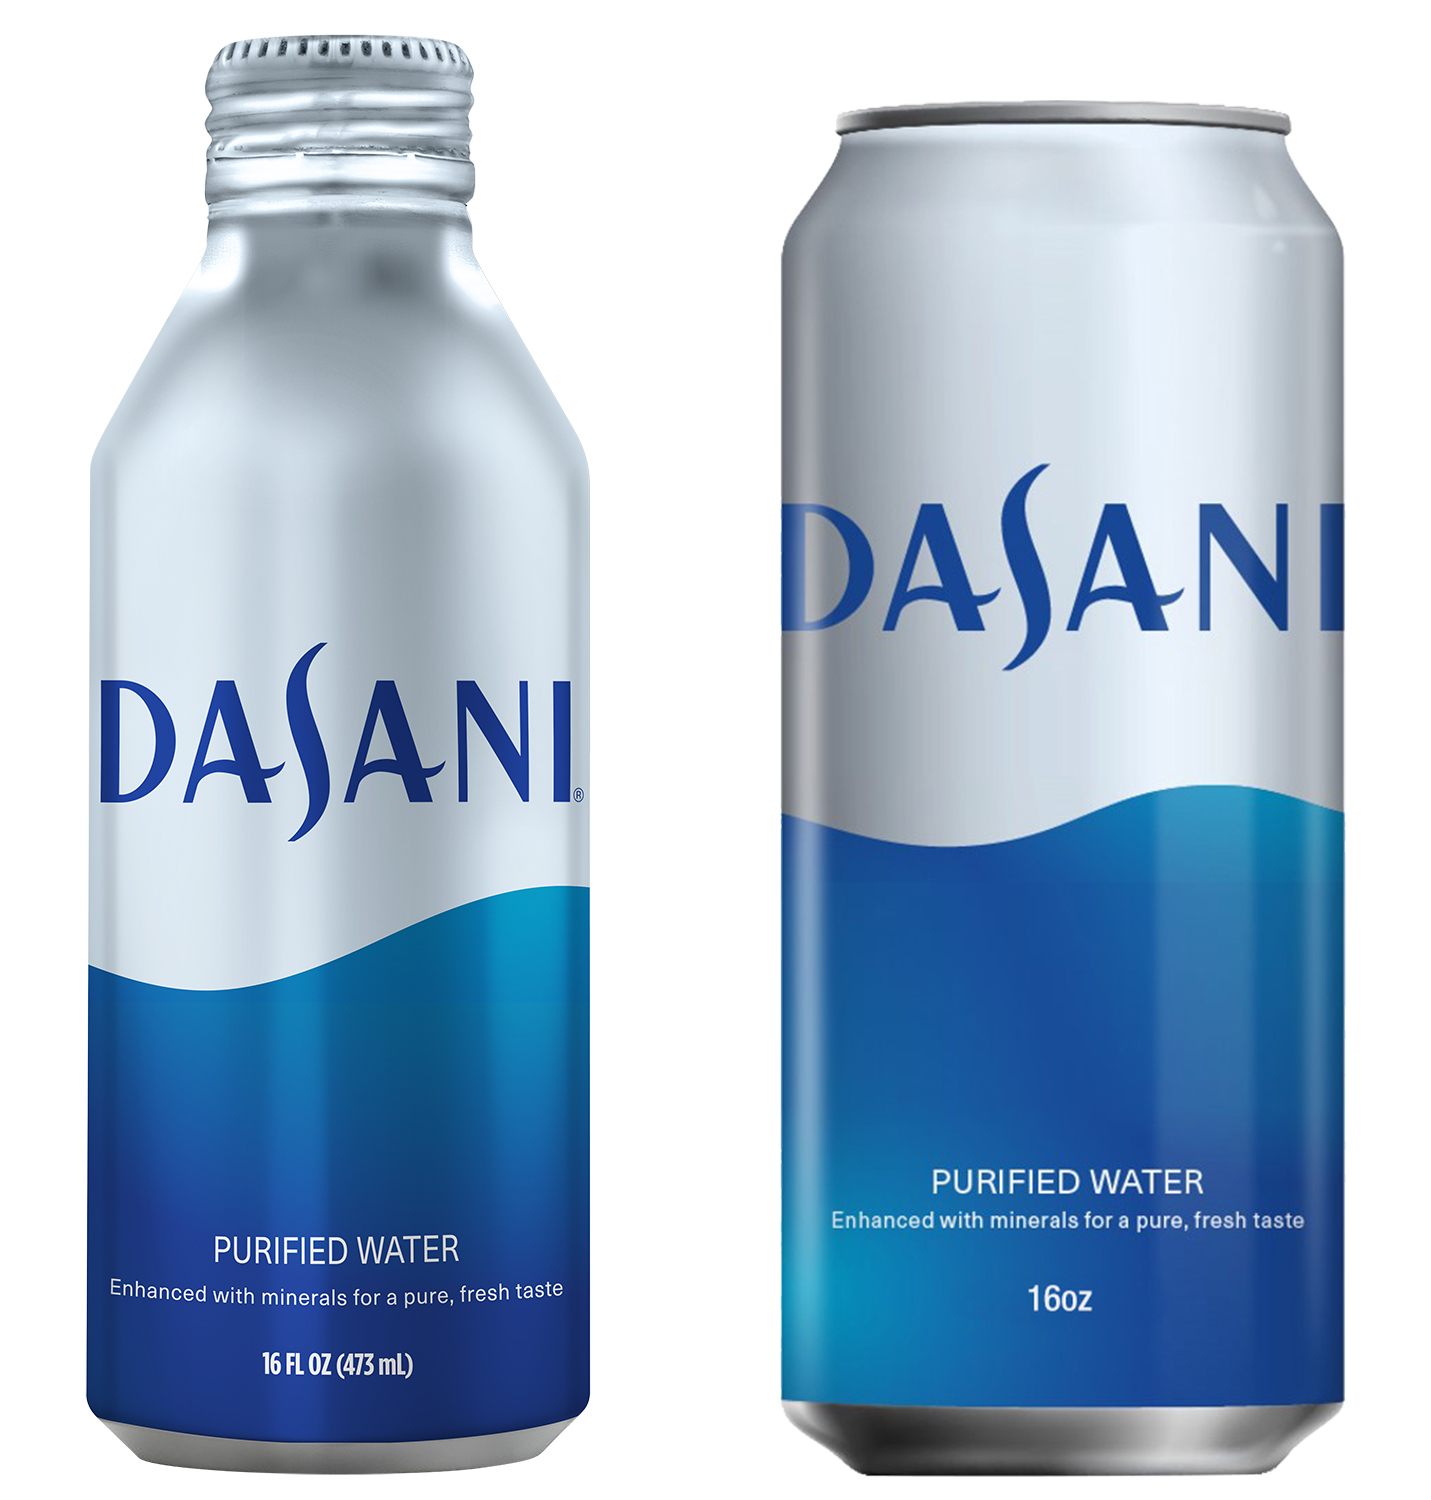 Dasani bottle and can